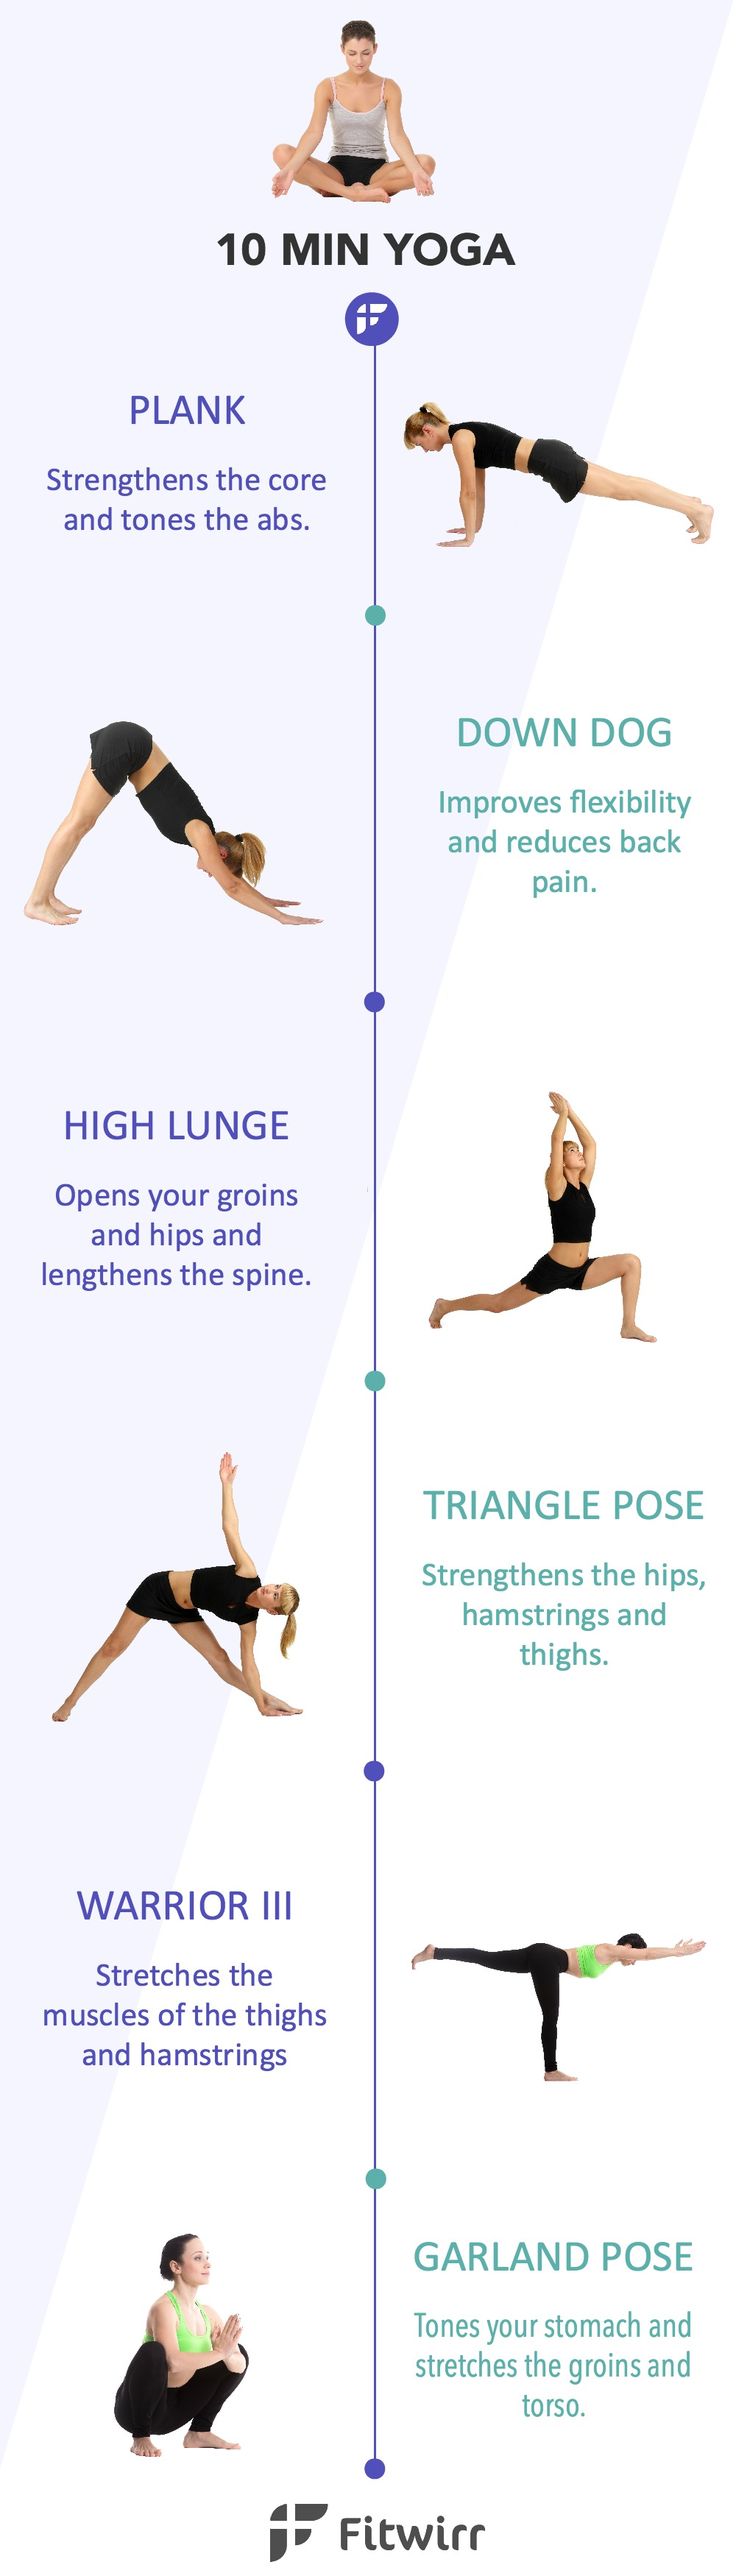 10 Minute Yoga Workout Routine to Strengthen Your Entire Body